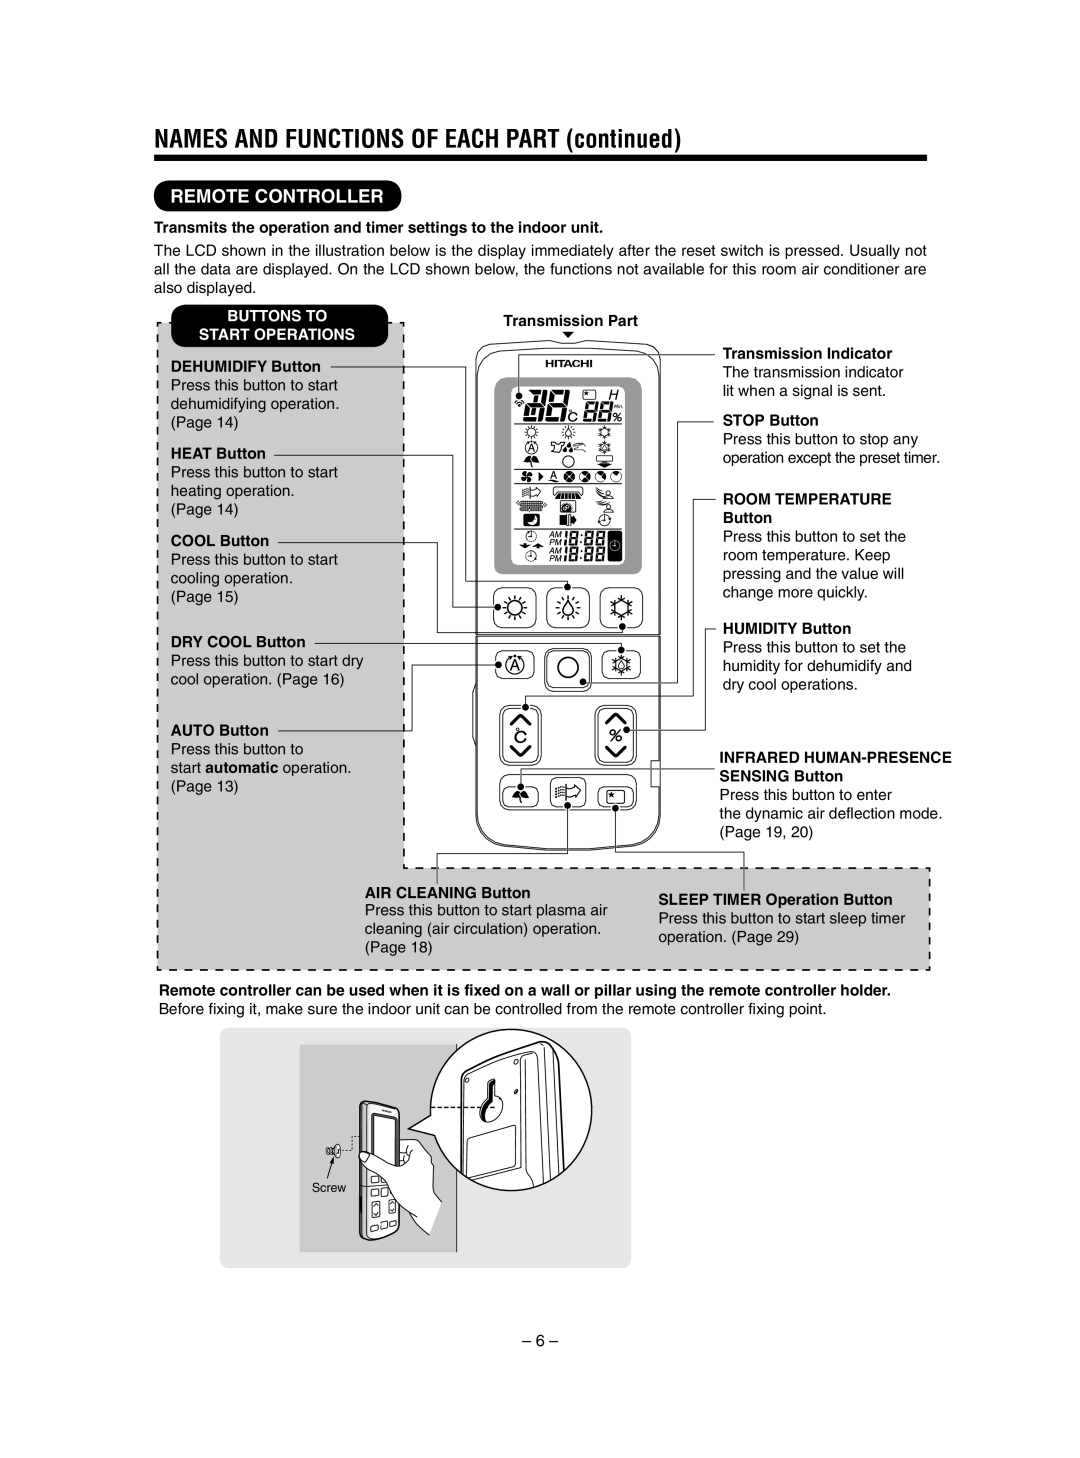 Hitachi RAS-SX13HAK / RAC-SX13HAK NAMES AND FUNCTIONS OF EACH PART continued, Remote Controller, Buttons To 